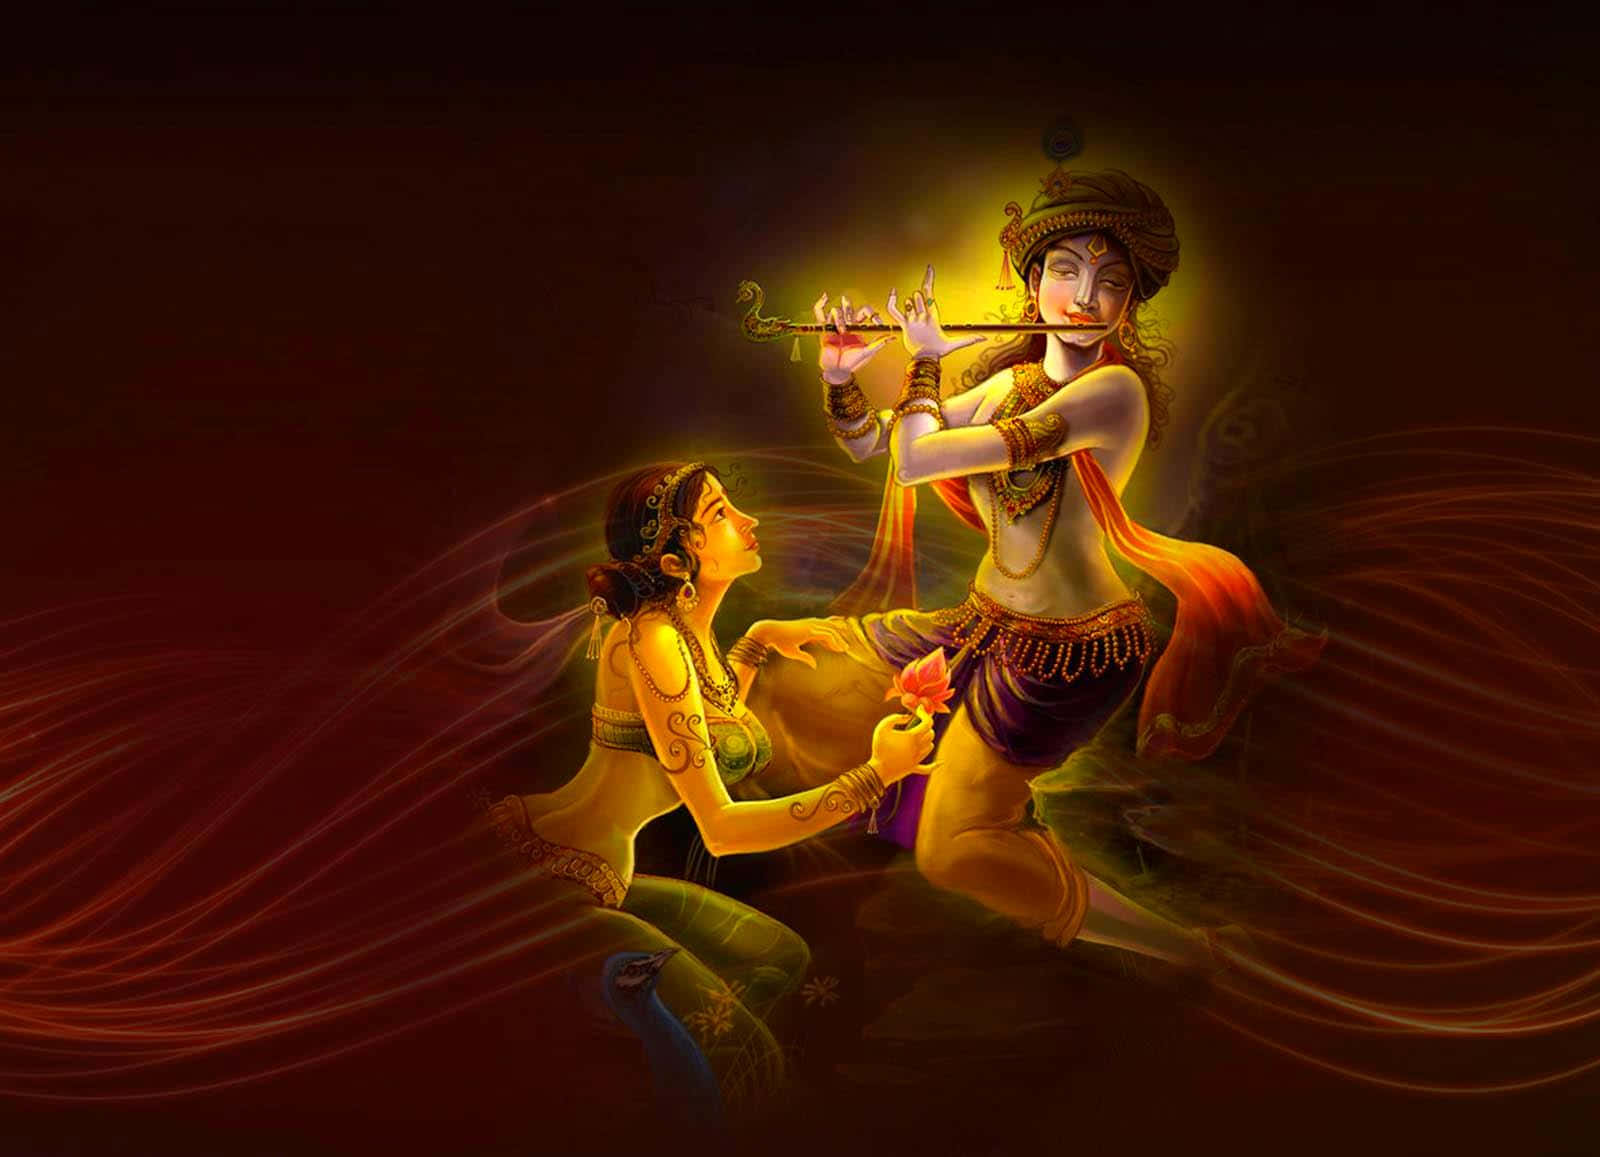 Krishna And Radha In The Form Of A Woman